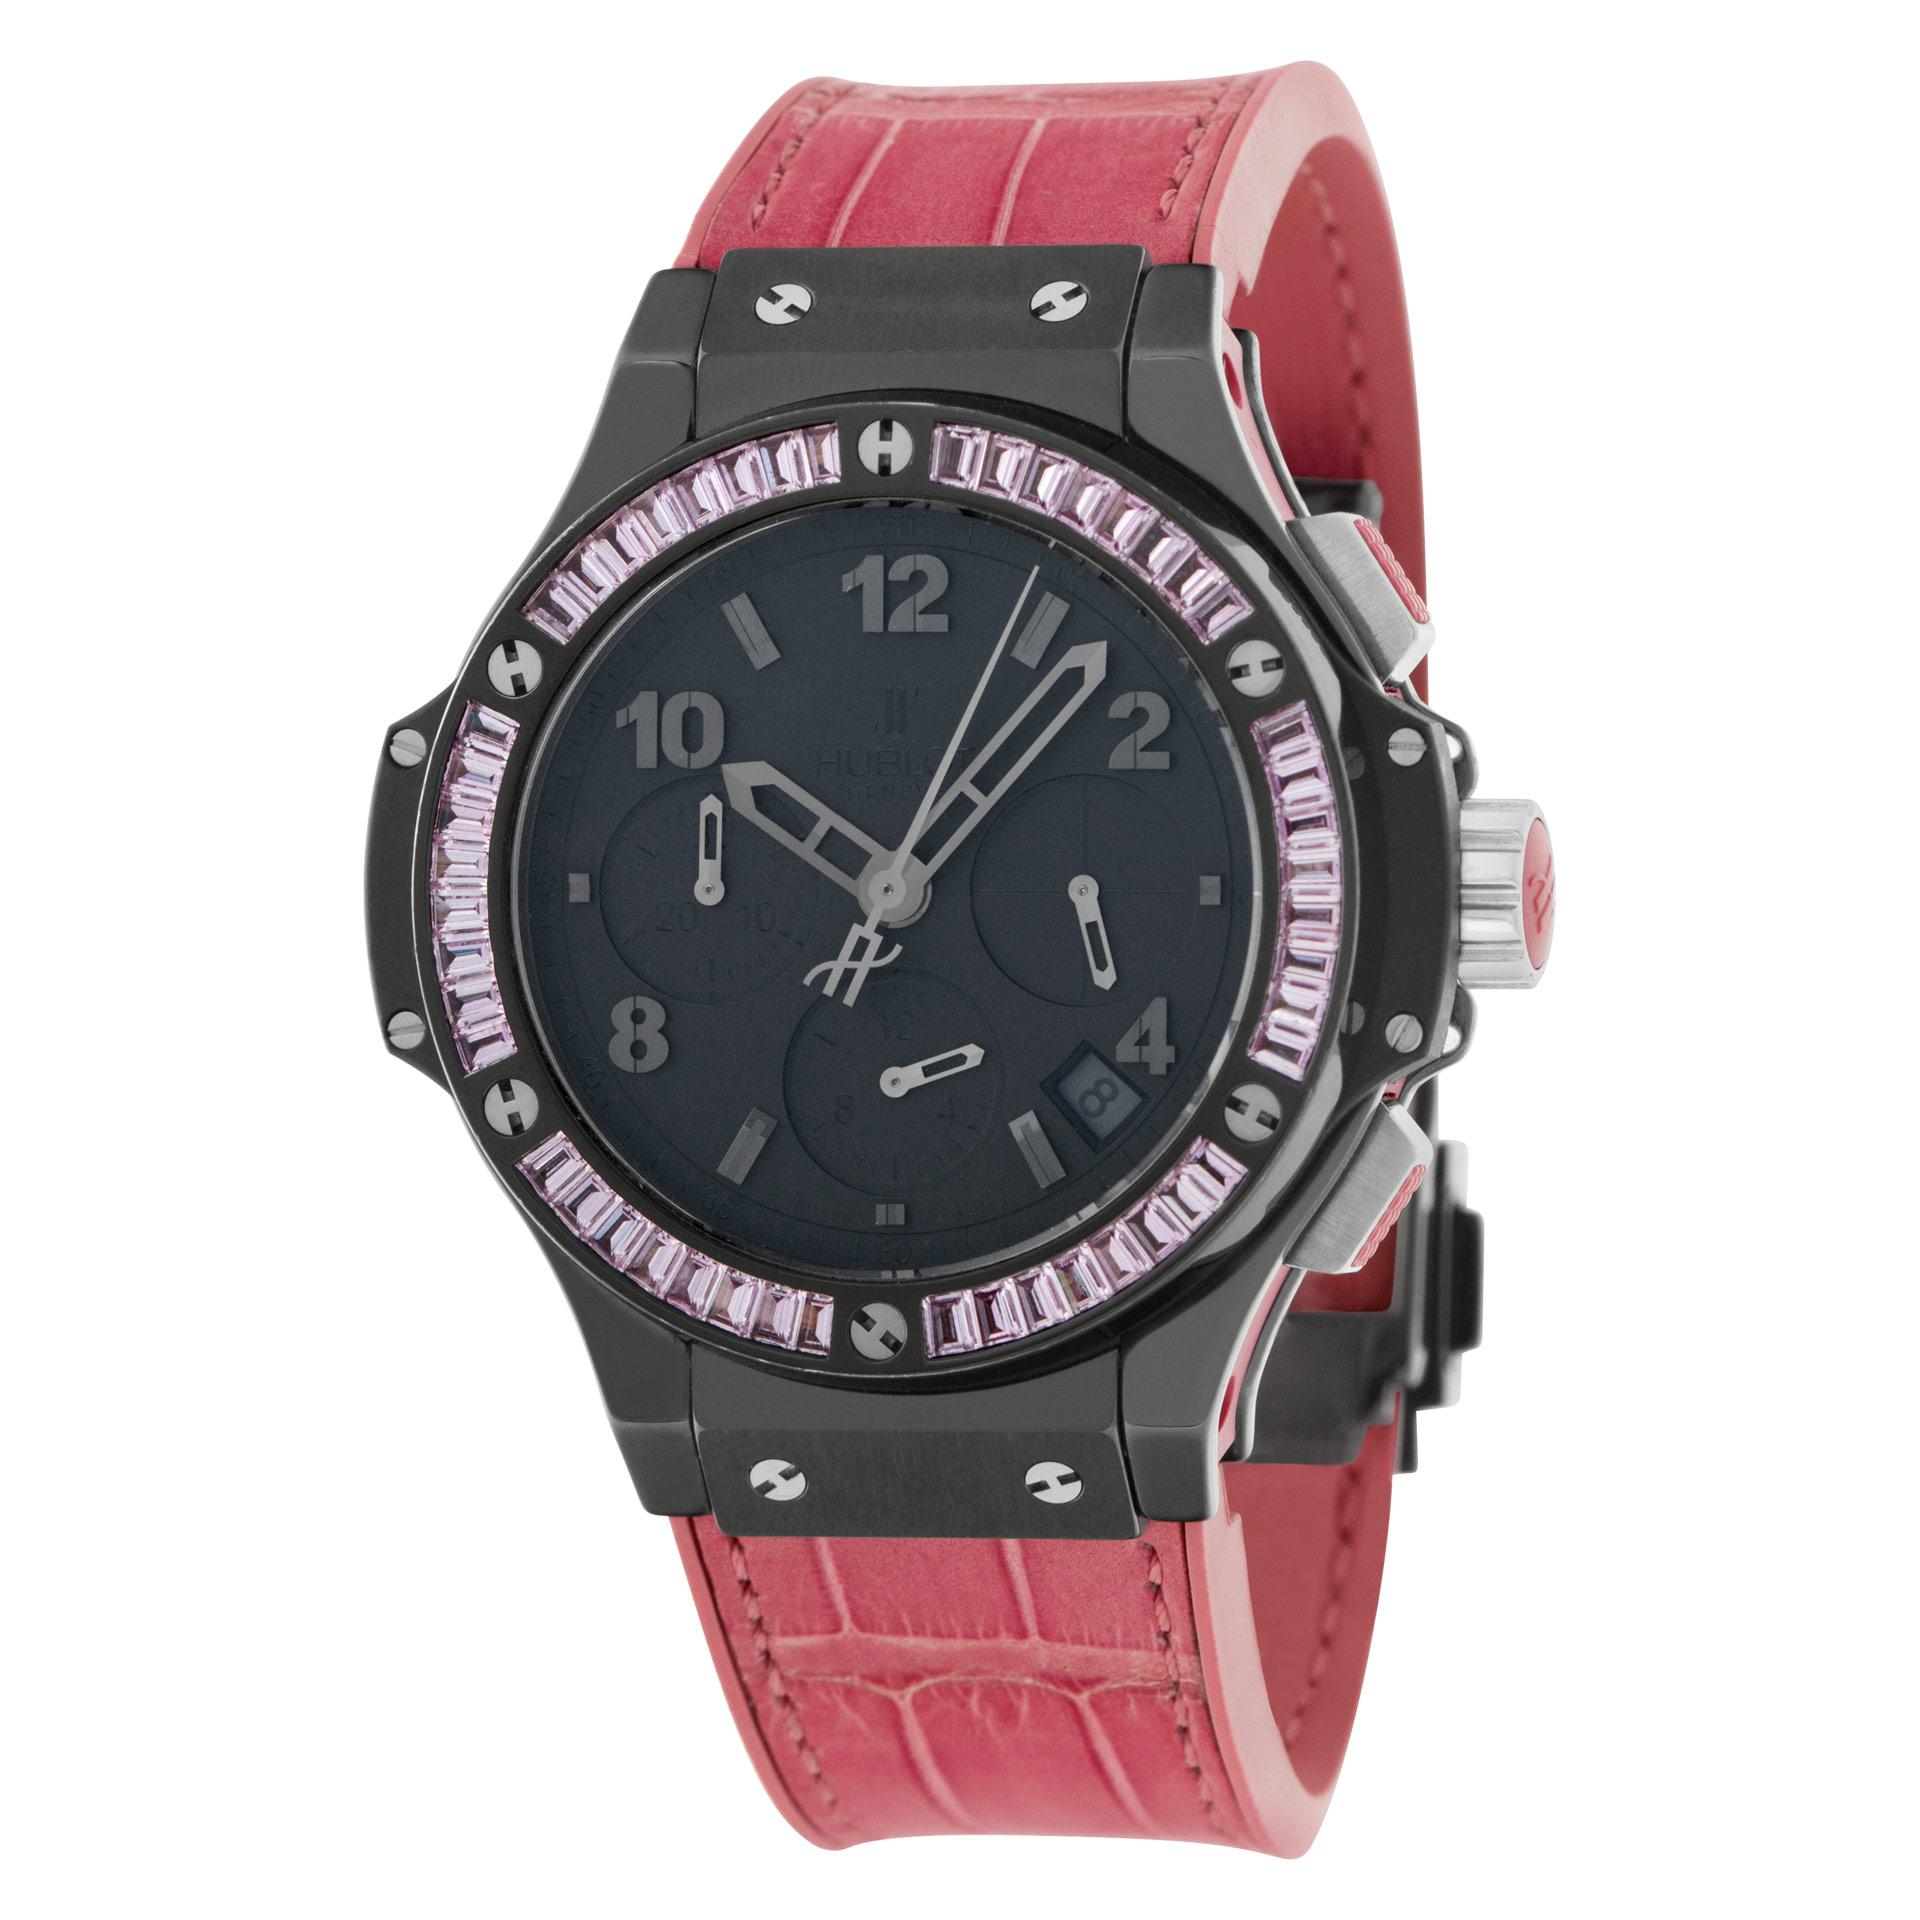 Hublot Big Bang Tutti Frutti Black Rose in black ceramic case with white Gold PVD set with 48 Baguette pink Sapphires with HUB 4300 Self-winding Chronograph movement  341.CP.1110.LR.1933. Case size 44 mm. Fine Pre-owned Hublot Watch.  Certified